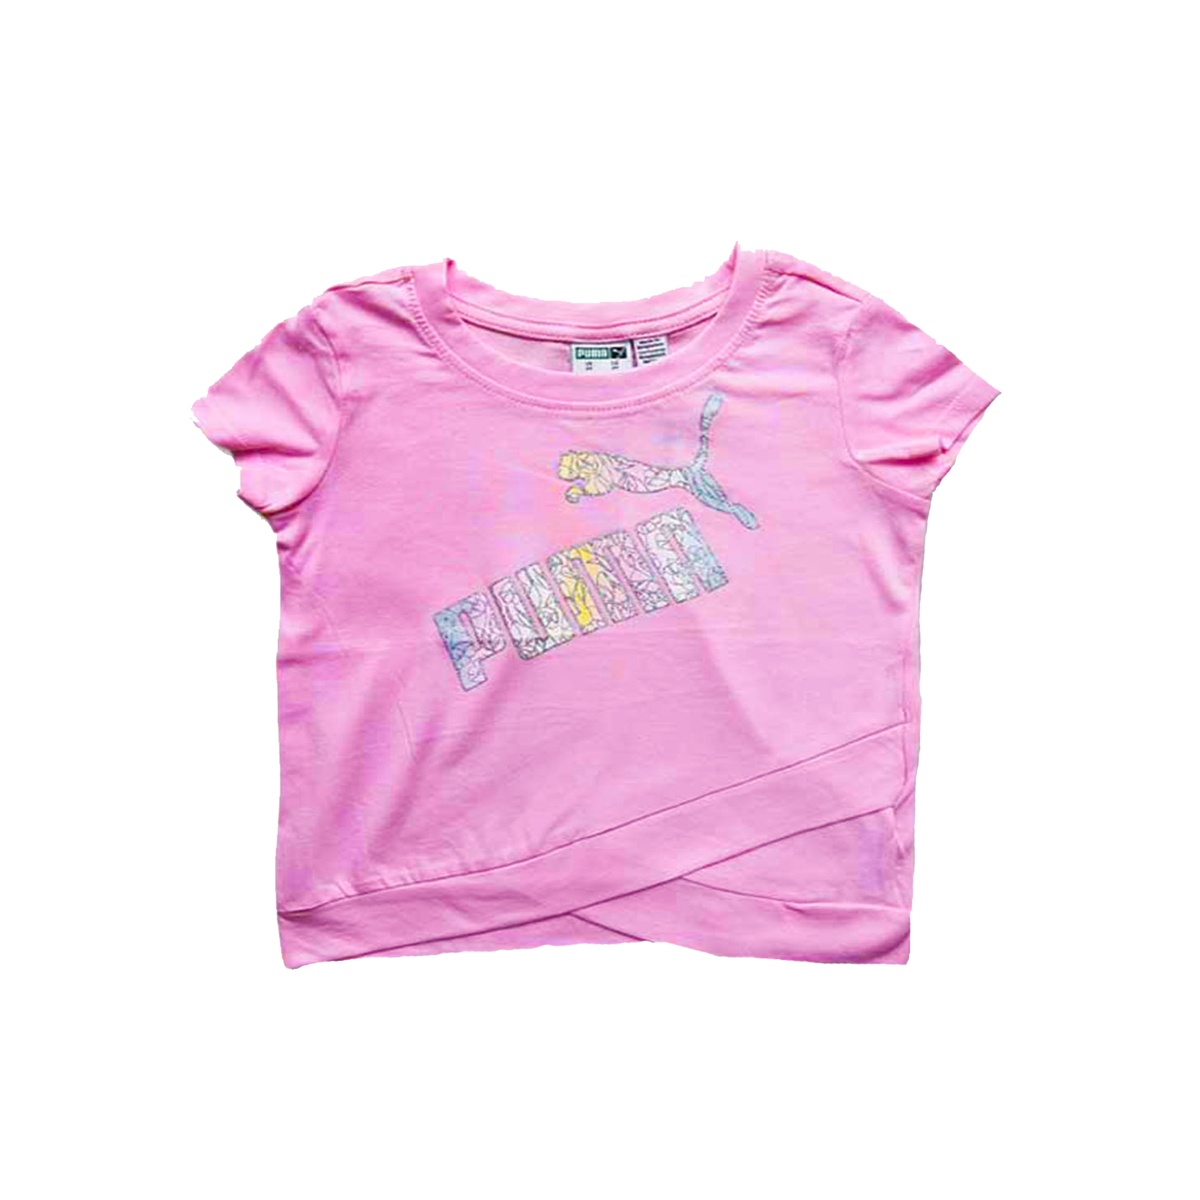 Brand Expo Premium Quality Branded Half Sleeves T-Shirt for Girl's (Pack of 2)